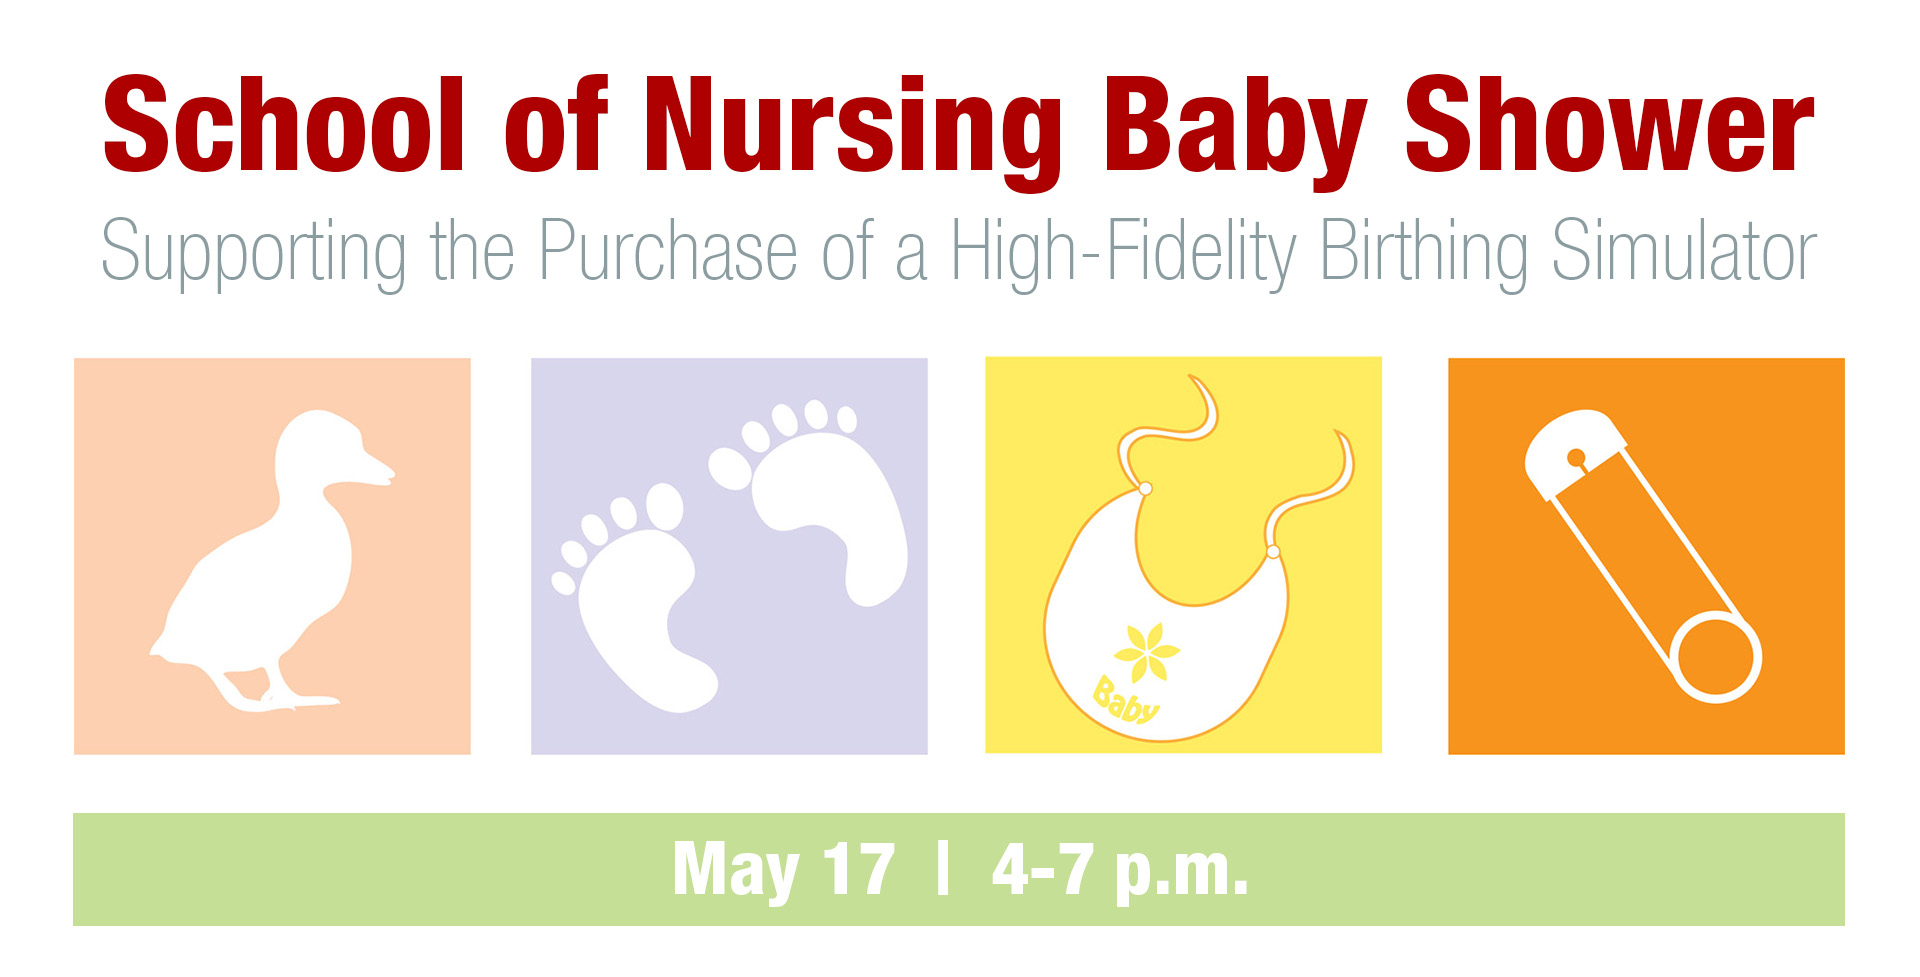 Baby shower to support birthing simulator purchase